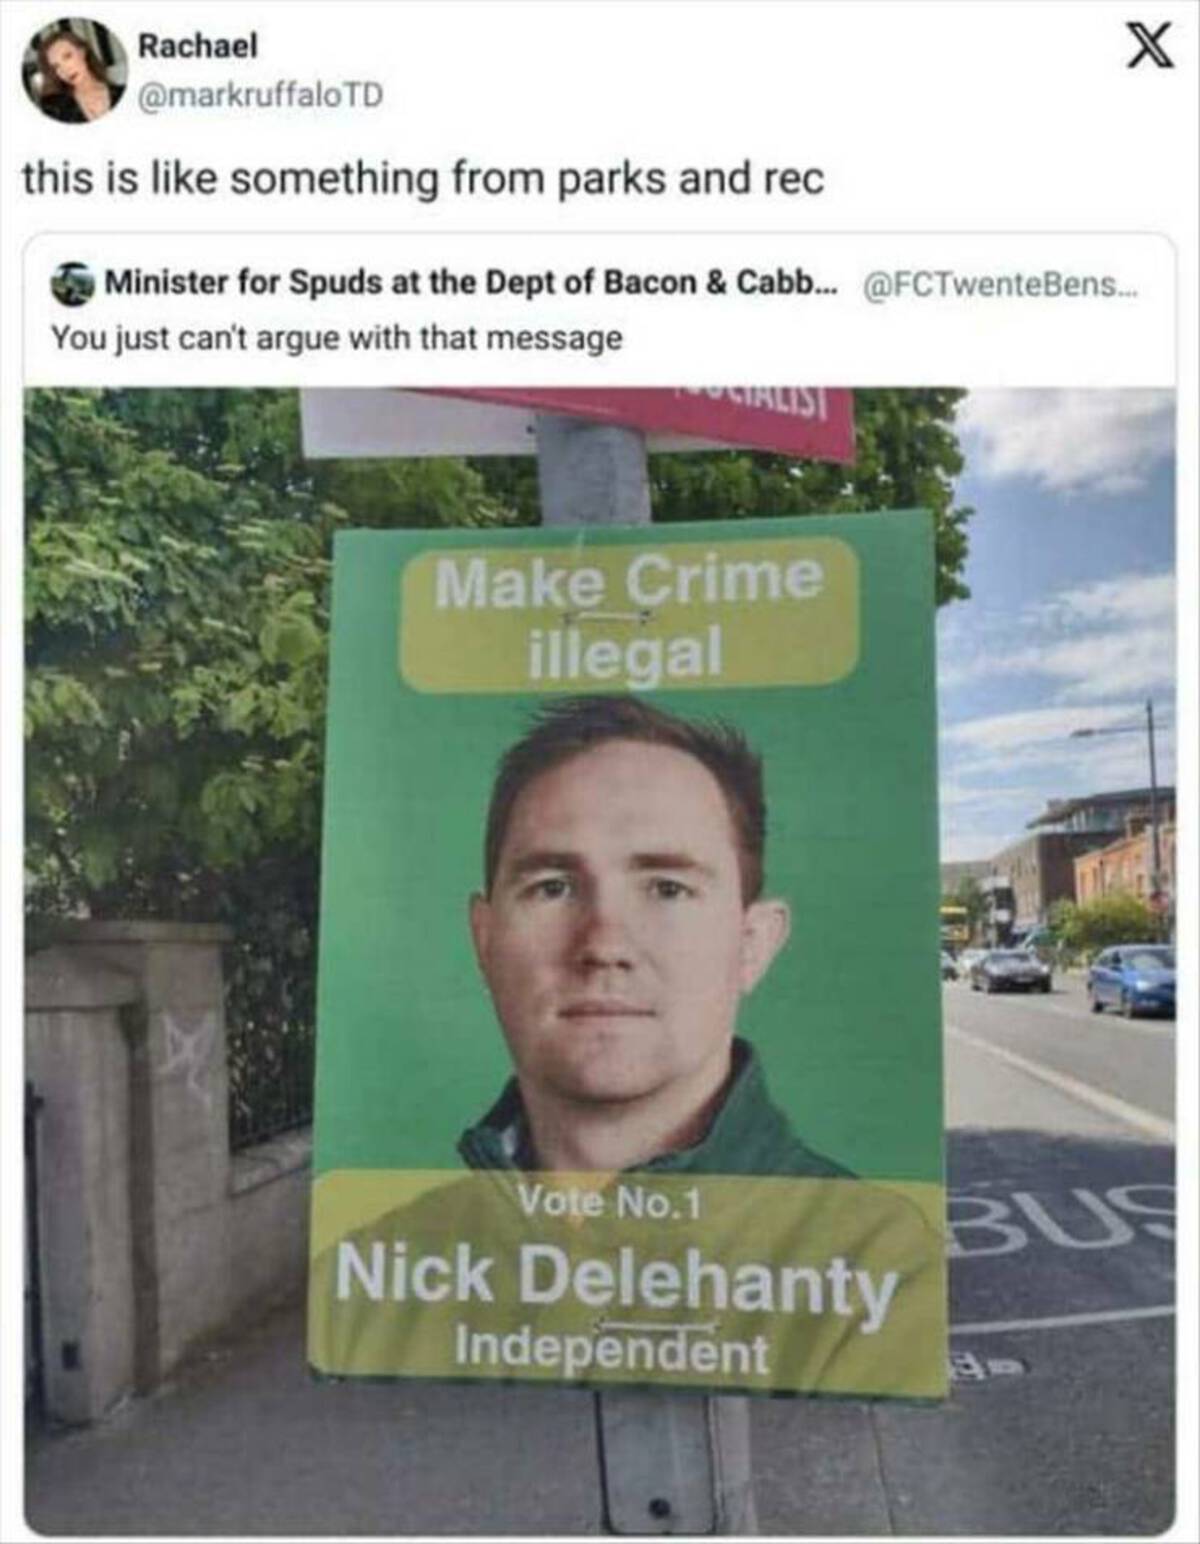 nick delahanty poster - Rachael Td this is something from parks and rec Minister for Spuds at the Dept of Bacon & Cabb... ... You just can't argue with that message Cialist Make Crime illegal Vote No.1 Nick Delehanty Independent X Bus